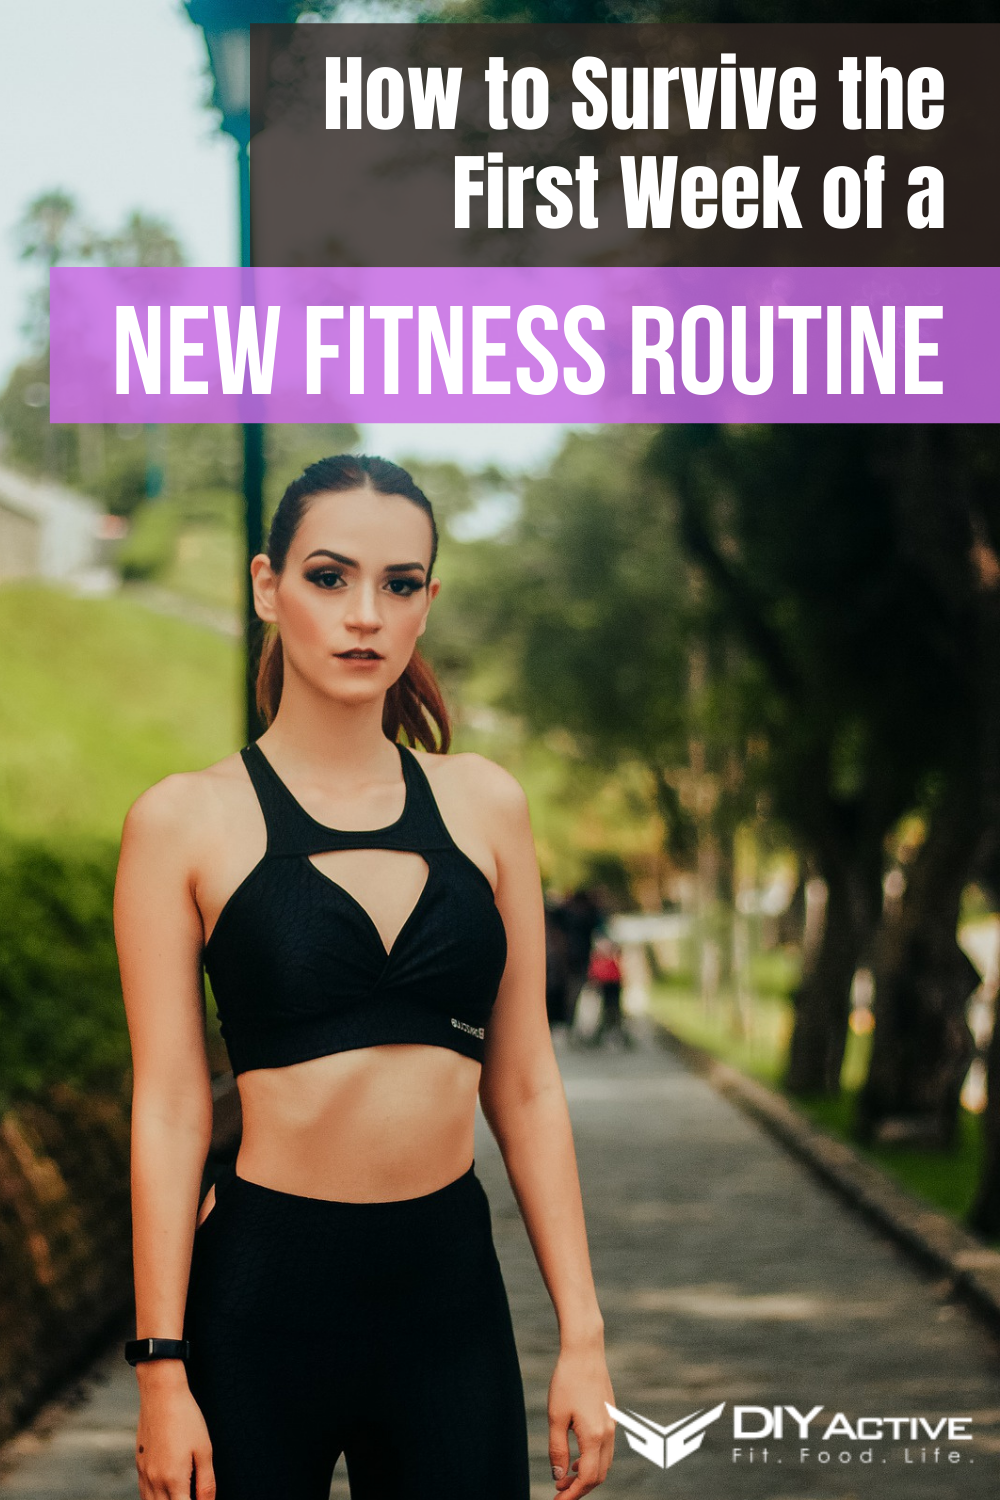 How to Survive the First Week of a New Fitness Routine